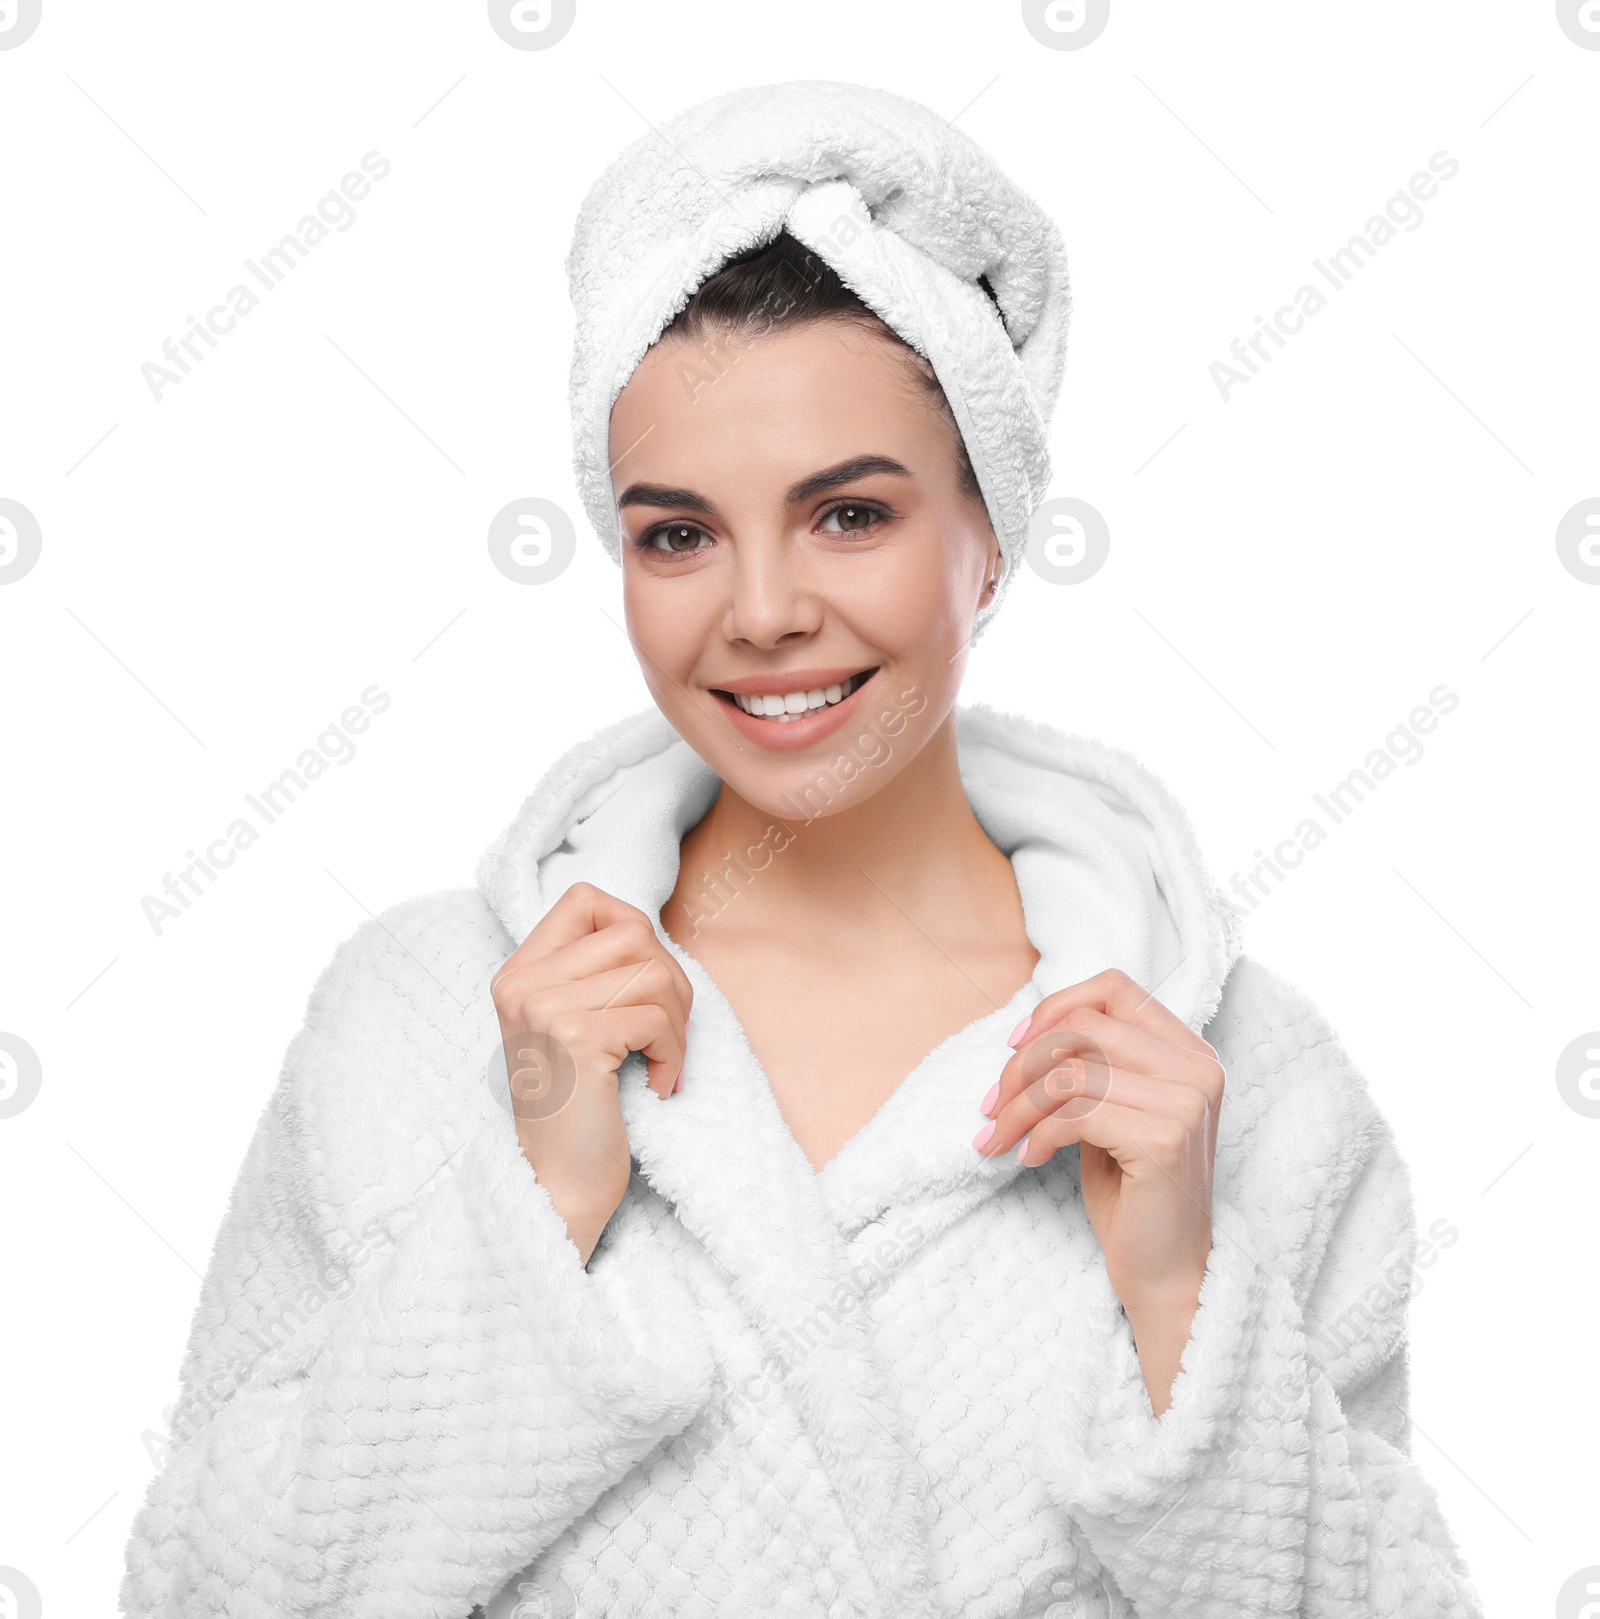 Photo of Happy young woman in bathrobe with towel on head against white background. Washing hair